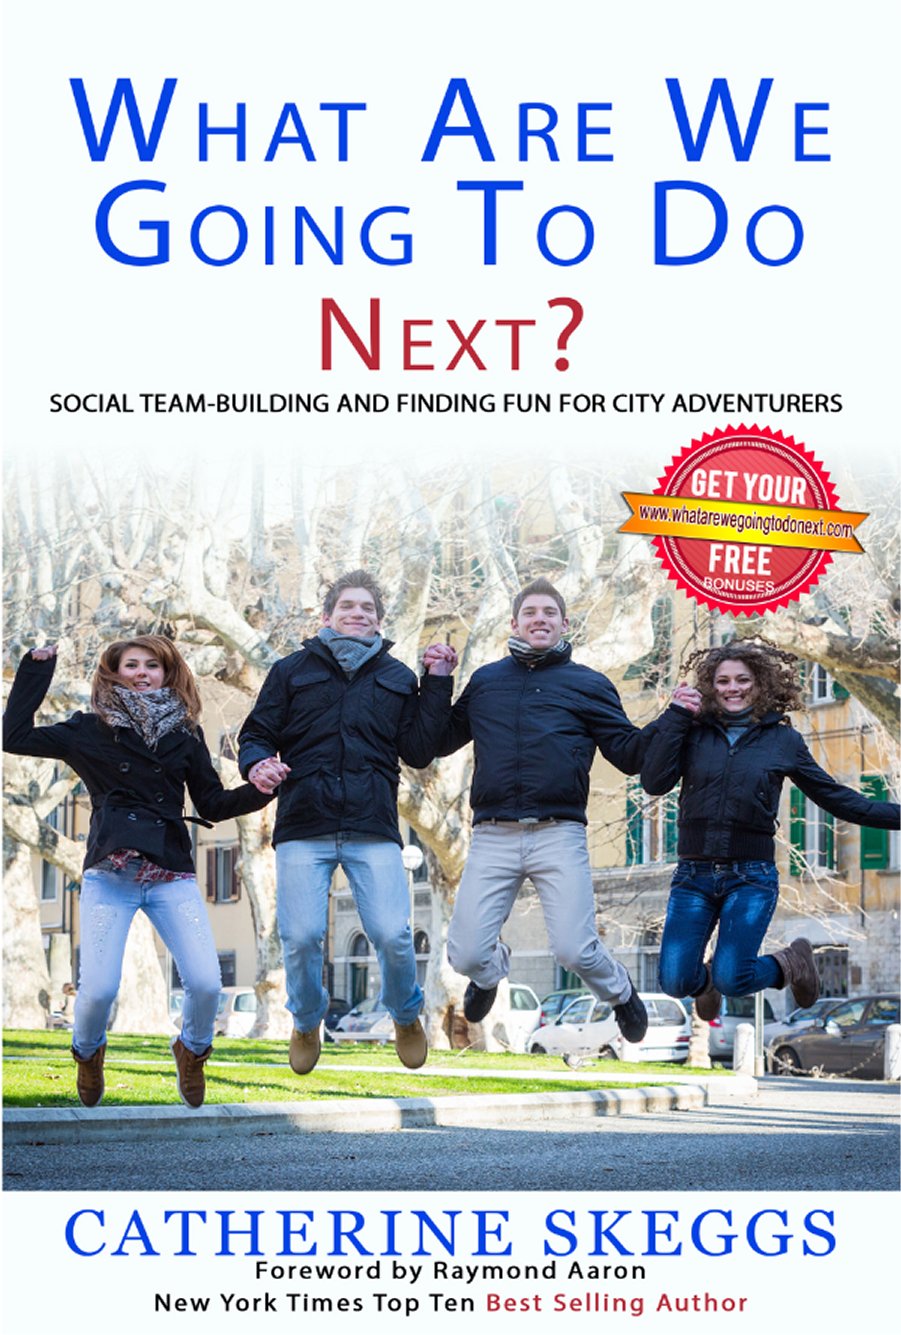 The book on social team-building and finding fun for city adventurers